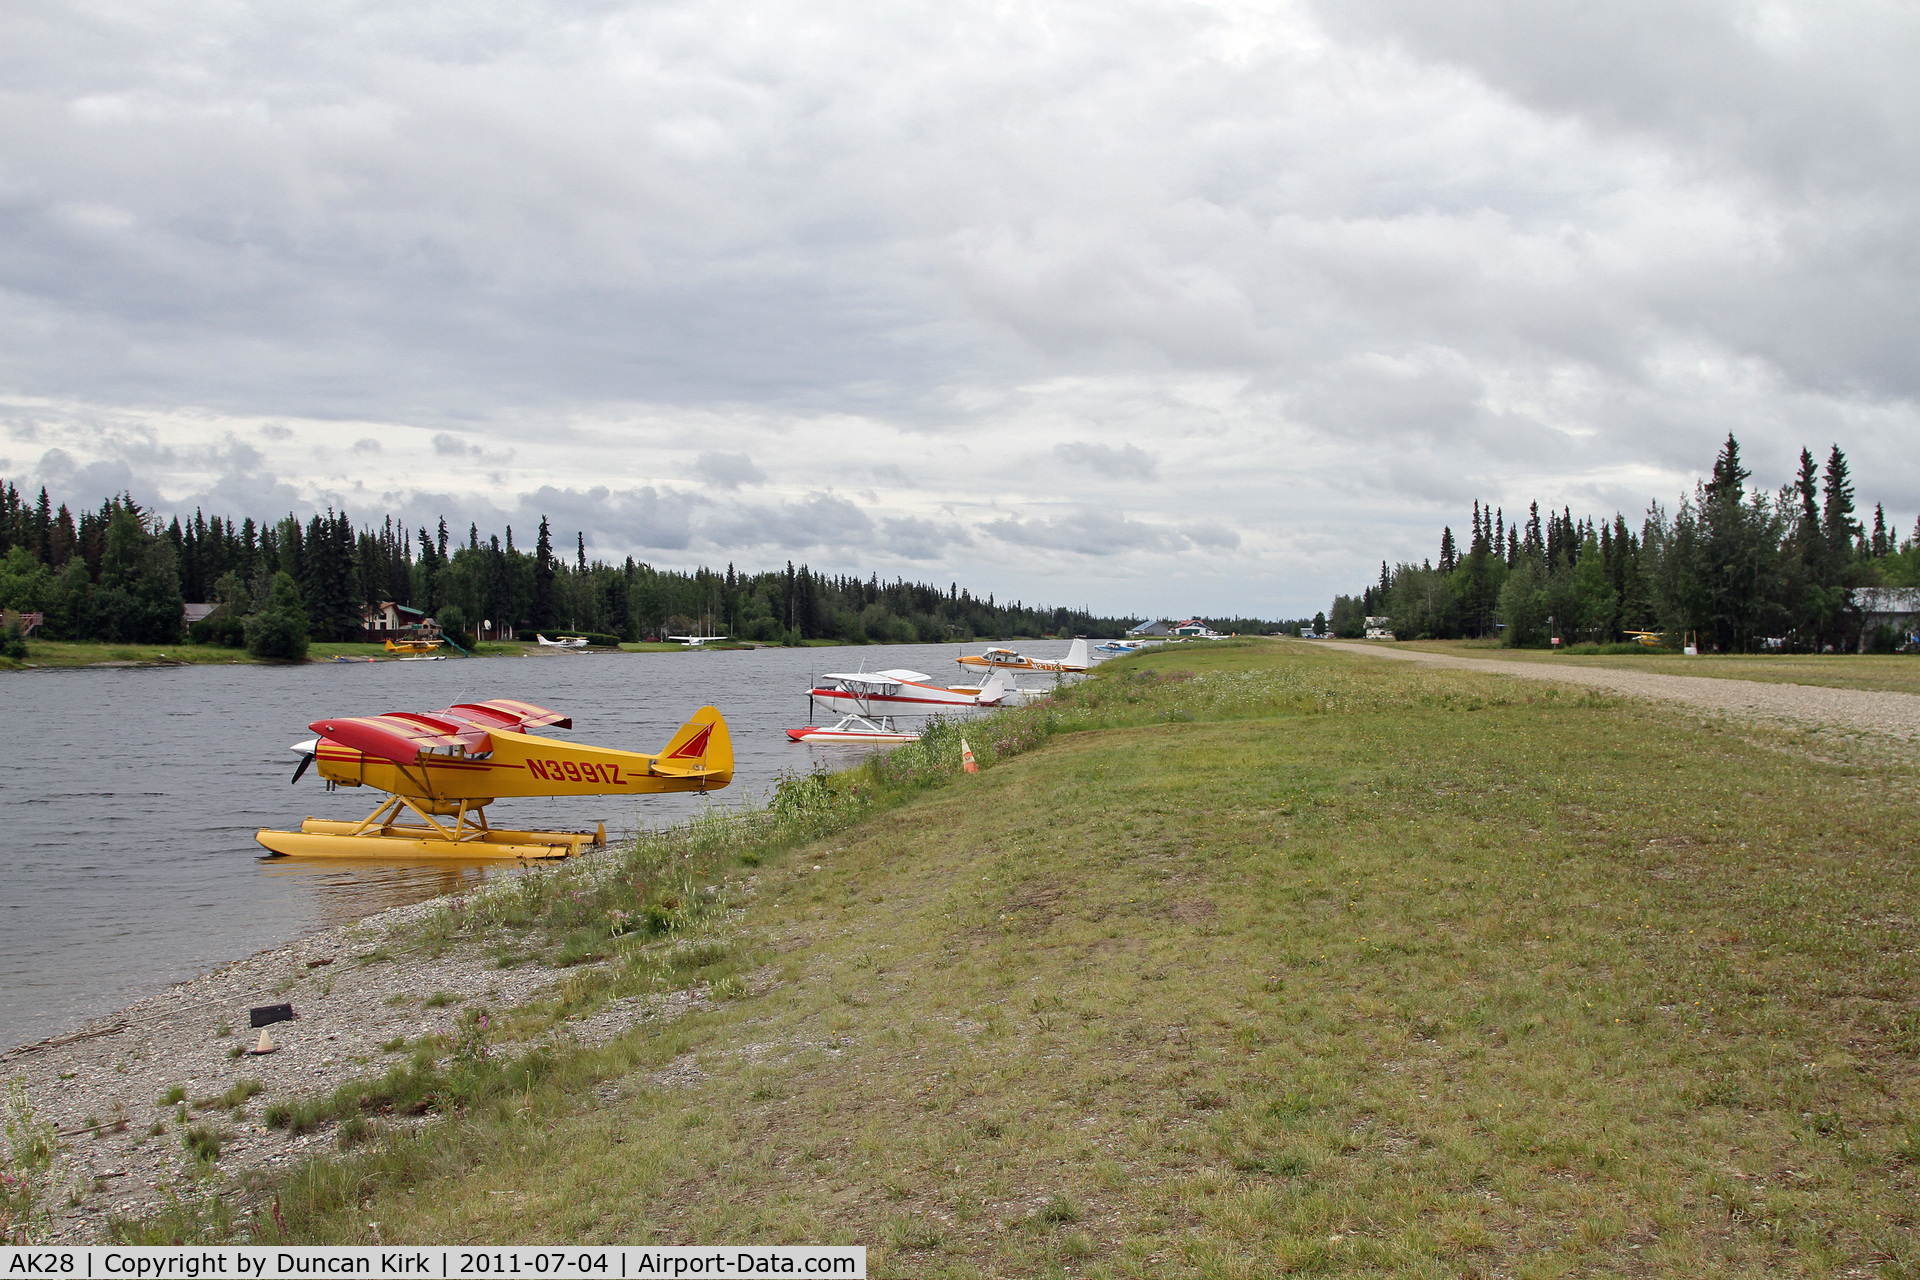 Chena Marina Airport (AK28) - A great airfield with lots of nooks and crannys and landing for both float and wheeled planes